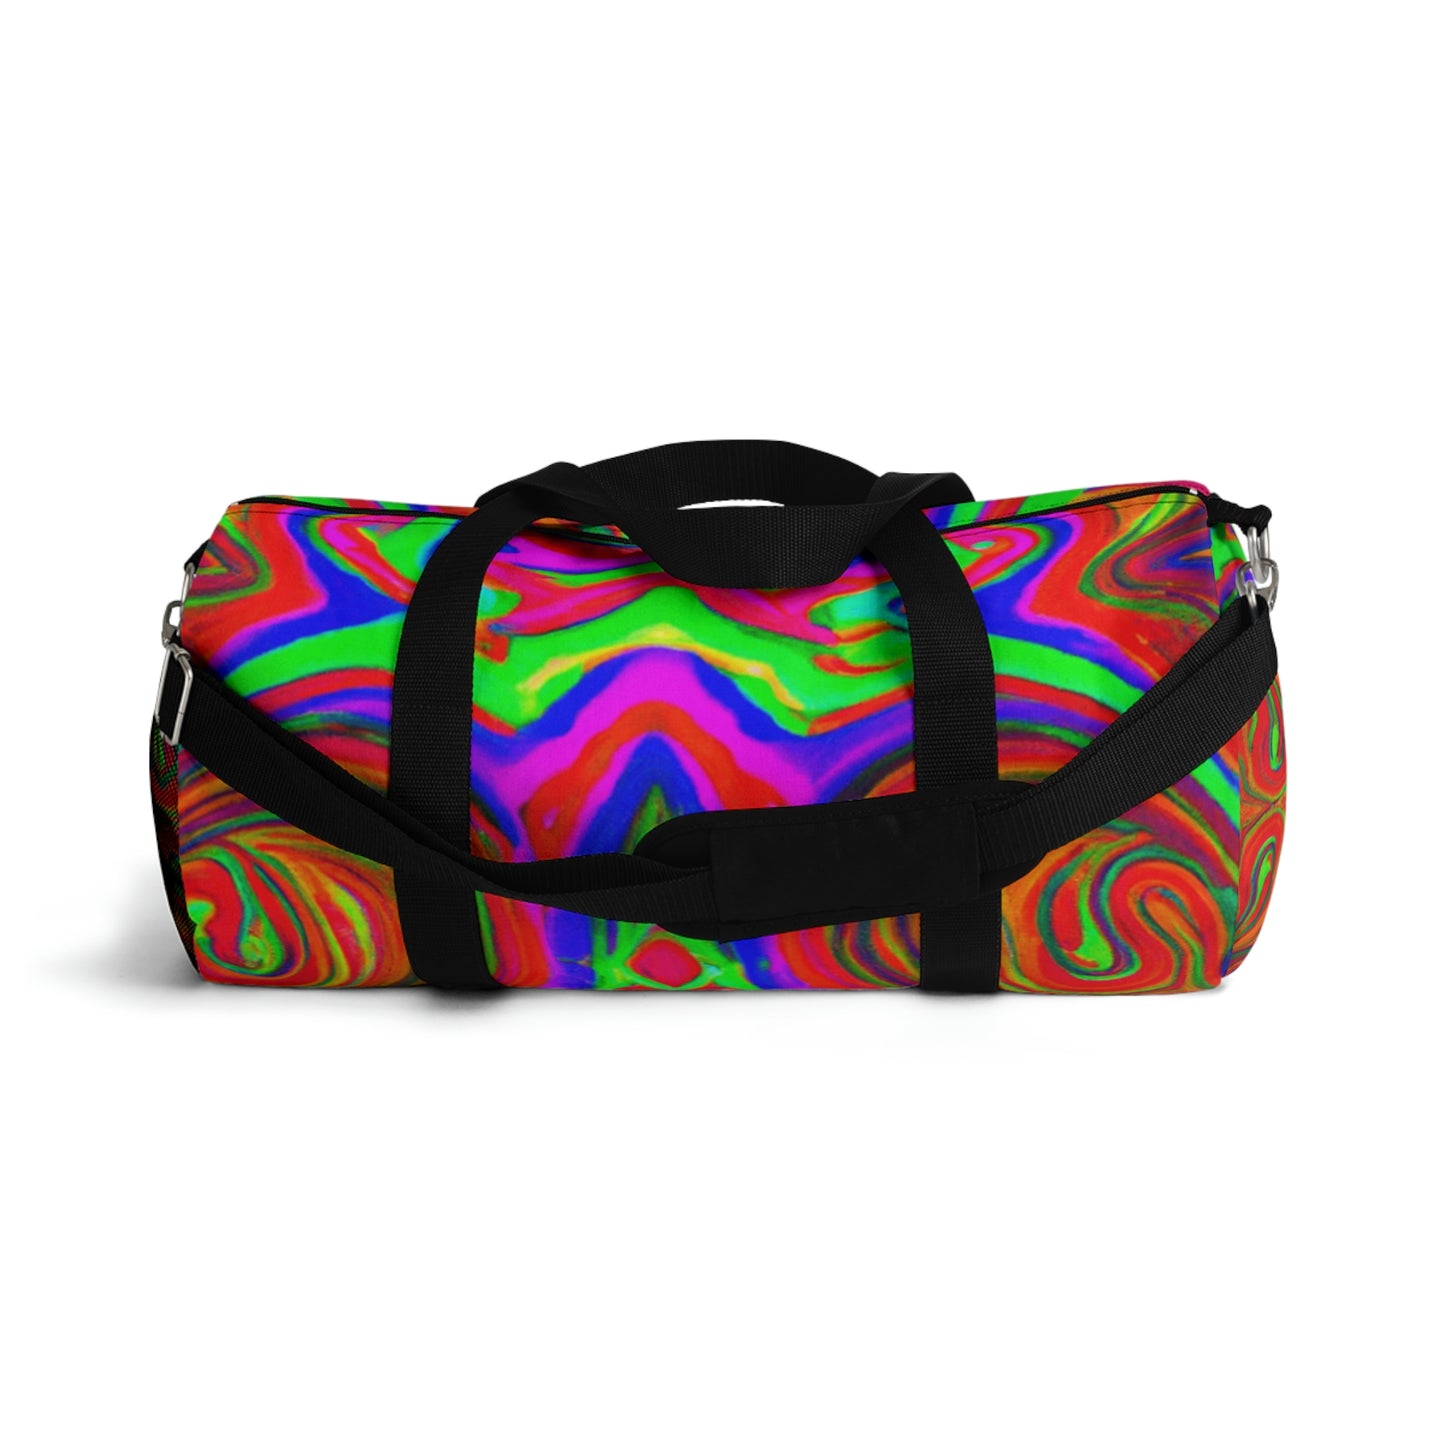 Cecilio Couture - Psychedelic Duffel Bag